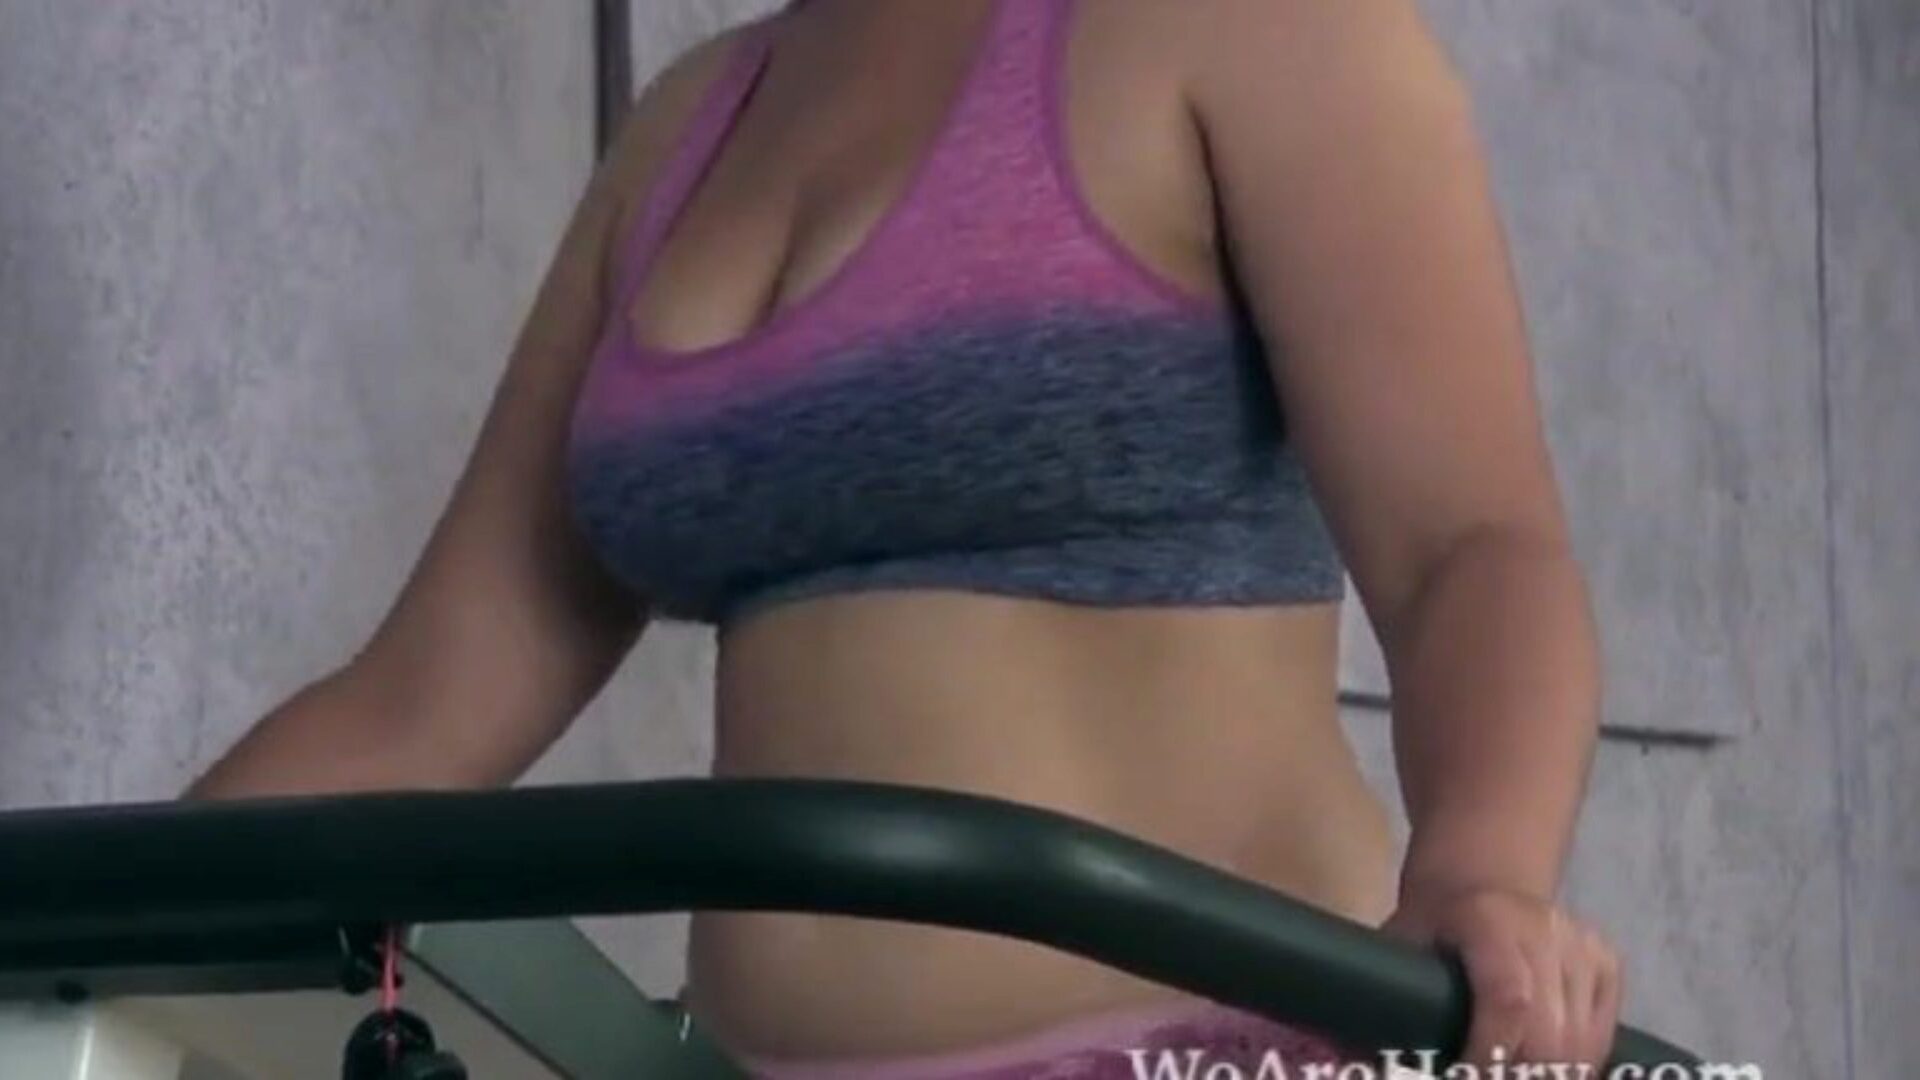 Francesca Z does a hot and stripped exercise Francesca Z is exercising in her purple shorts and purple top. On the treadmill that chick disrobes in nature's outfit and lets her 34D's fly and her curly cum-hole get air. That Babe drains her body and flashes off her sexy bod